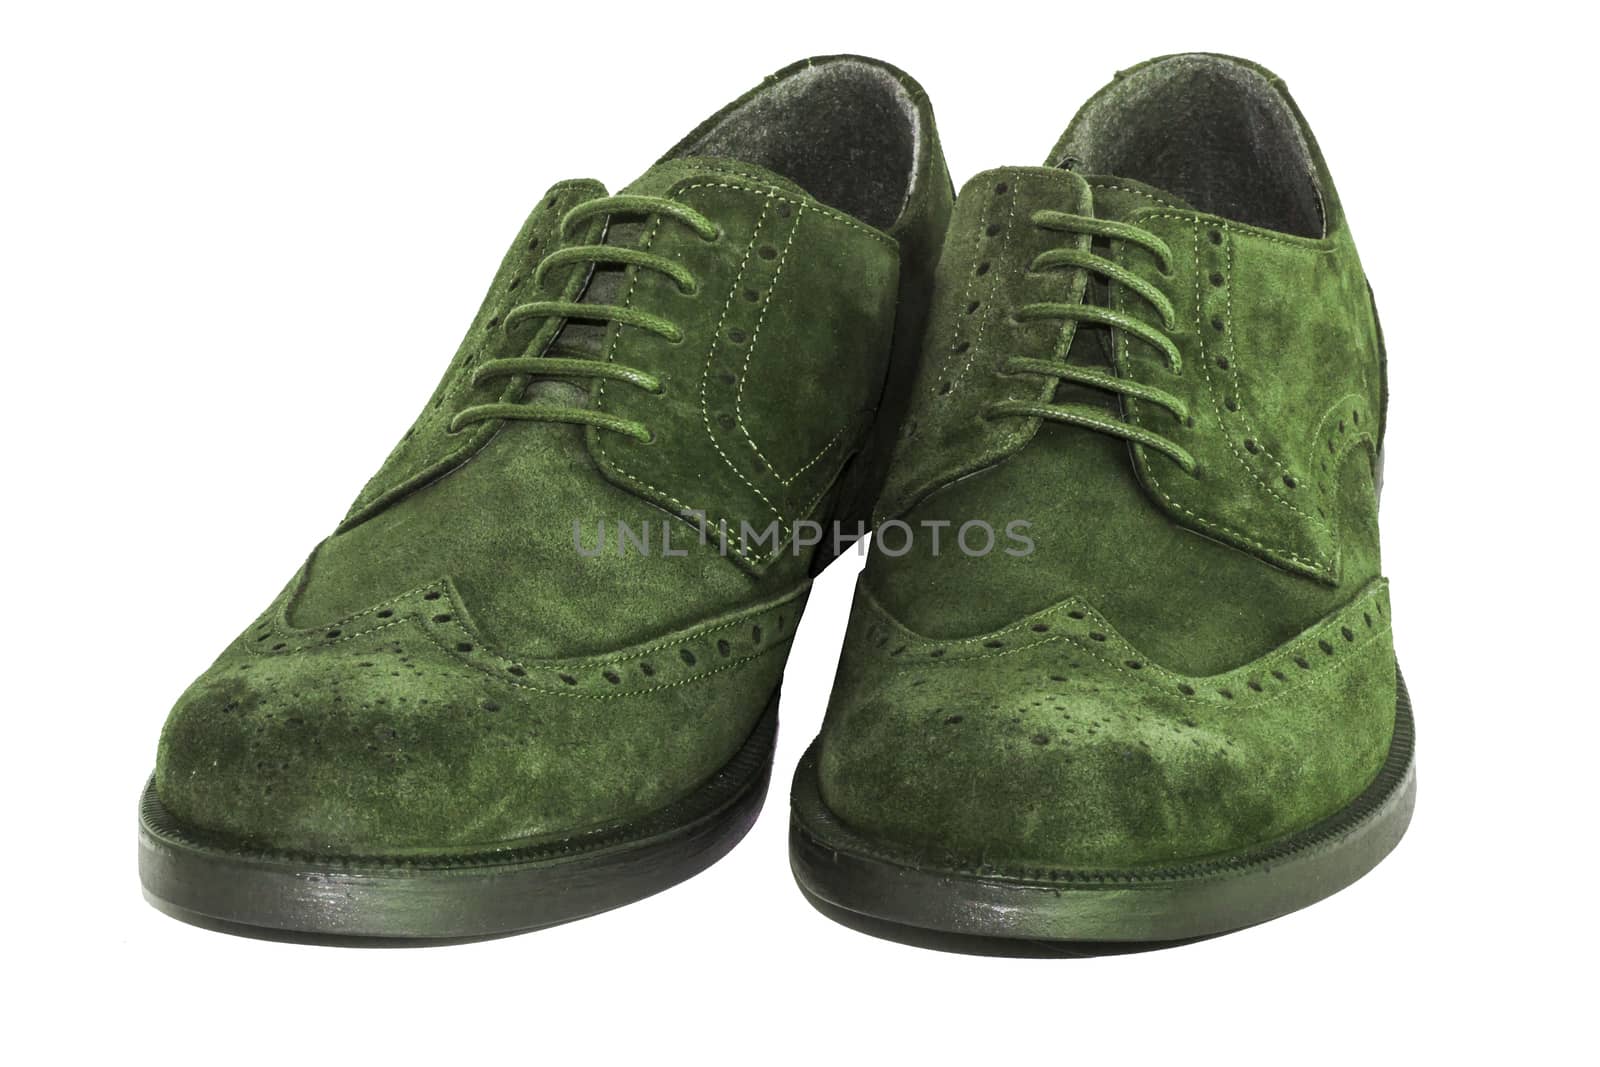 green suede shoes by Chechotkin